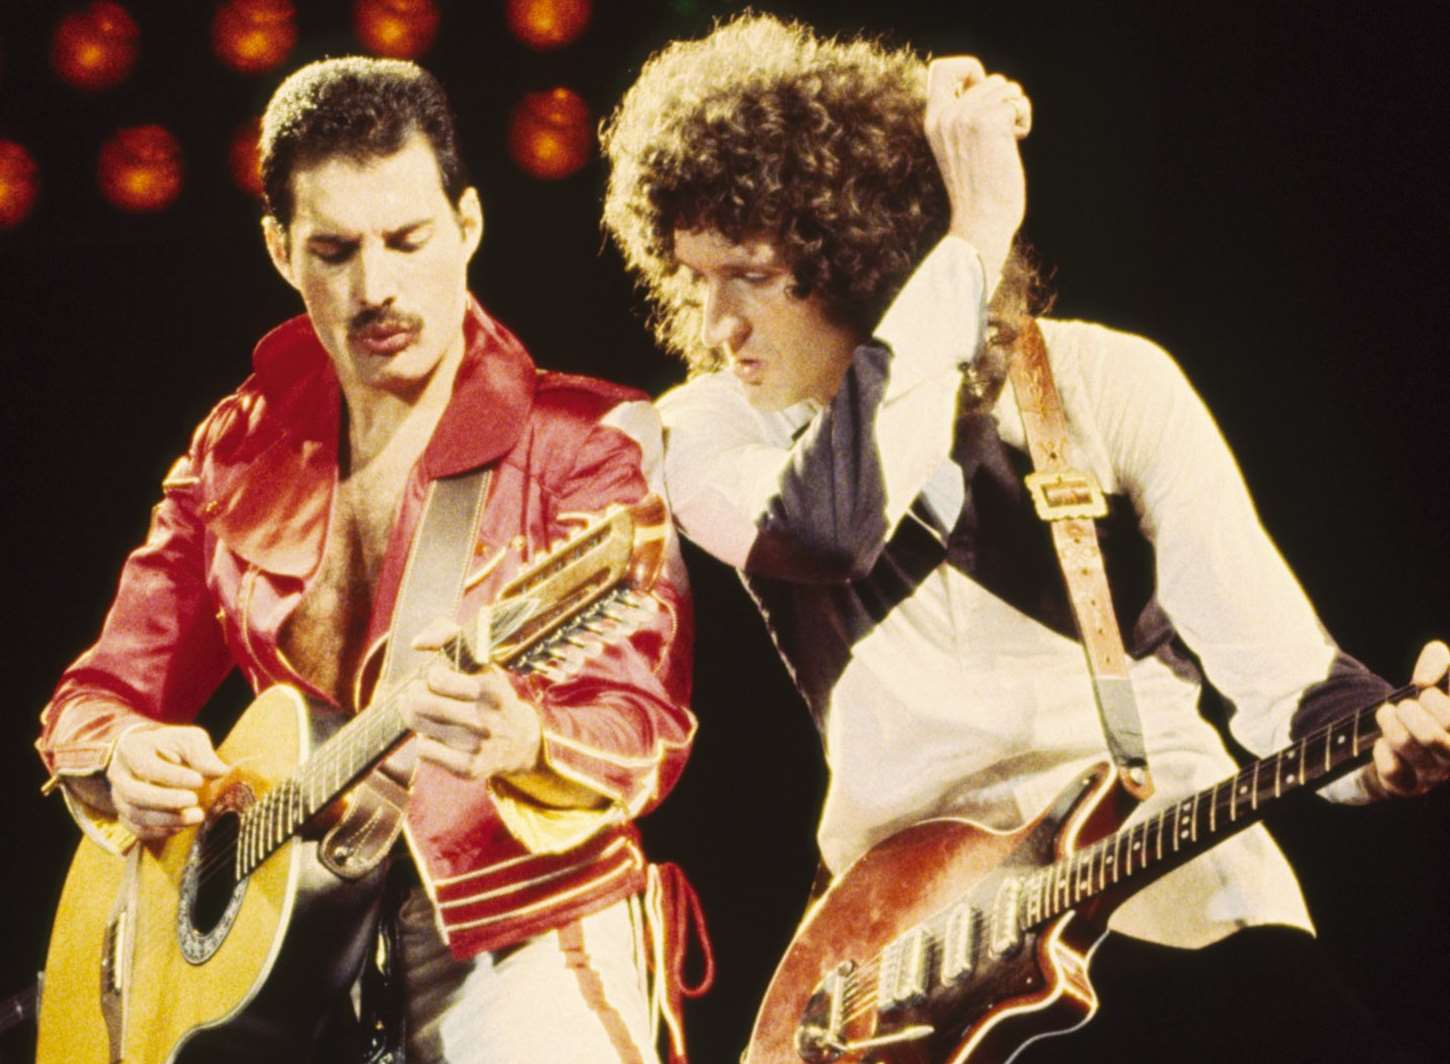 Freddie Mercury and Brian May perform in Queen